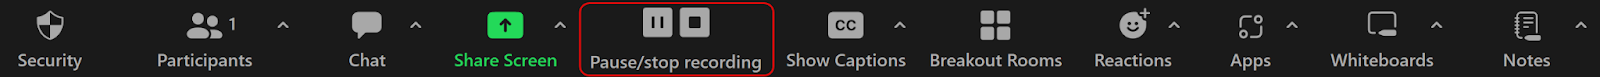 Zoom menu bar with the pause/recording option highlighted.